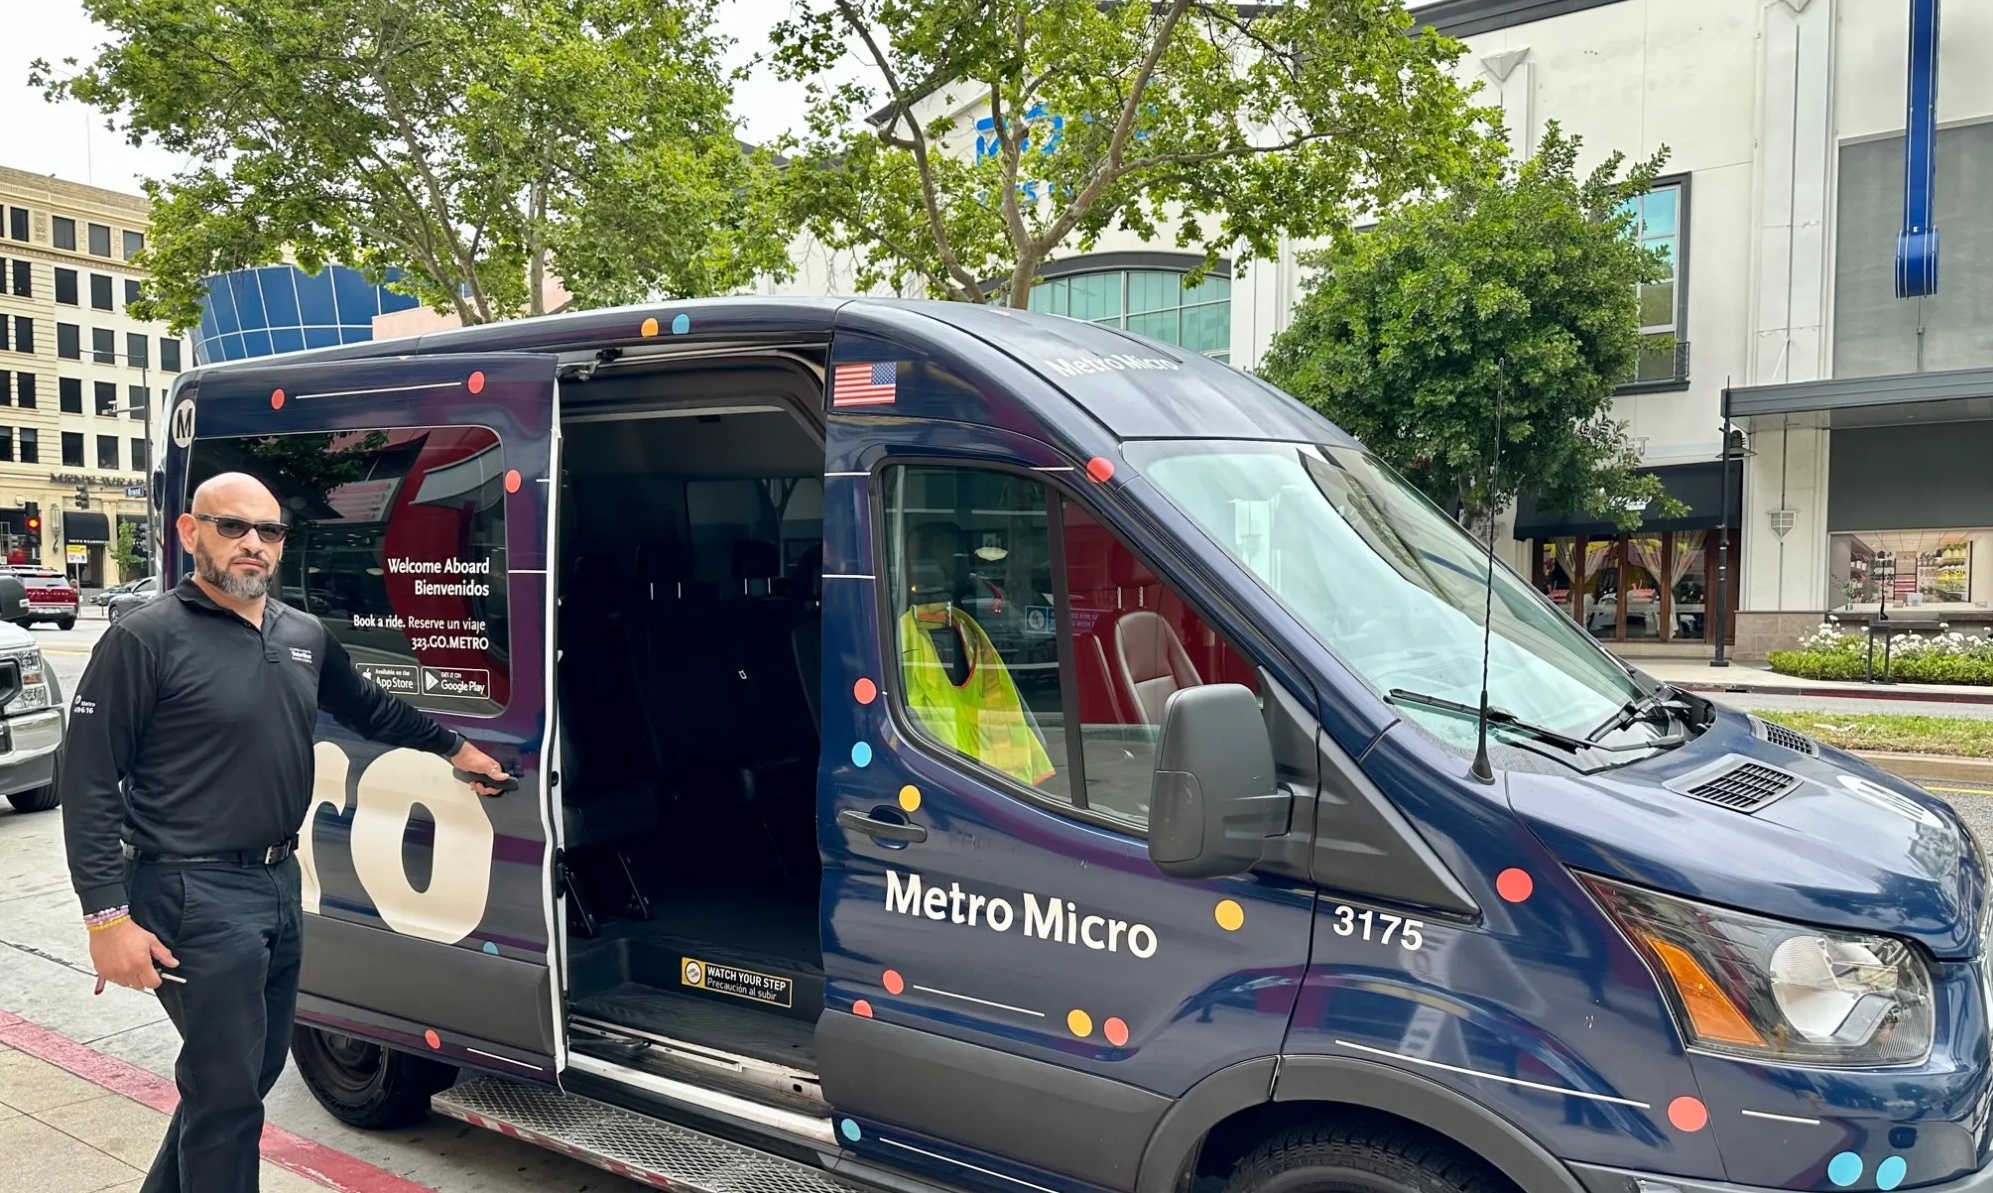 Metro Micro a shared ride in Los Angeles for a dollar